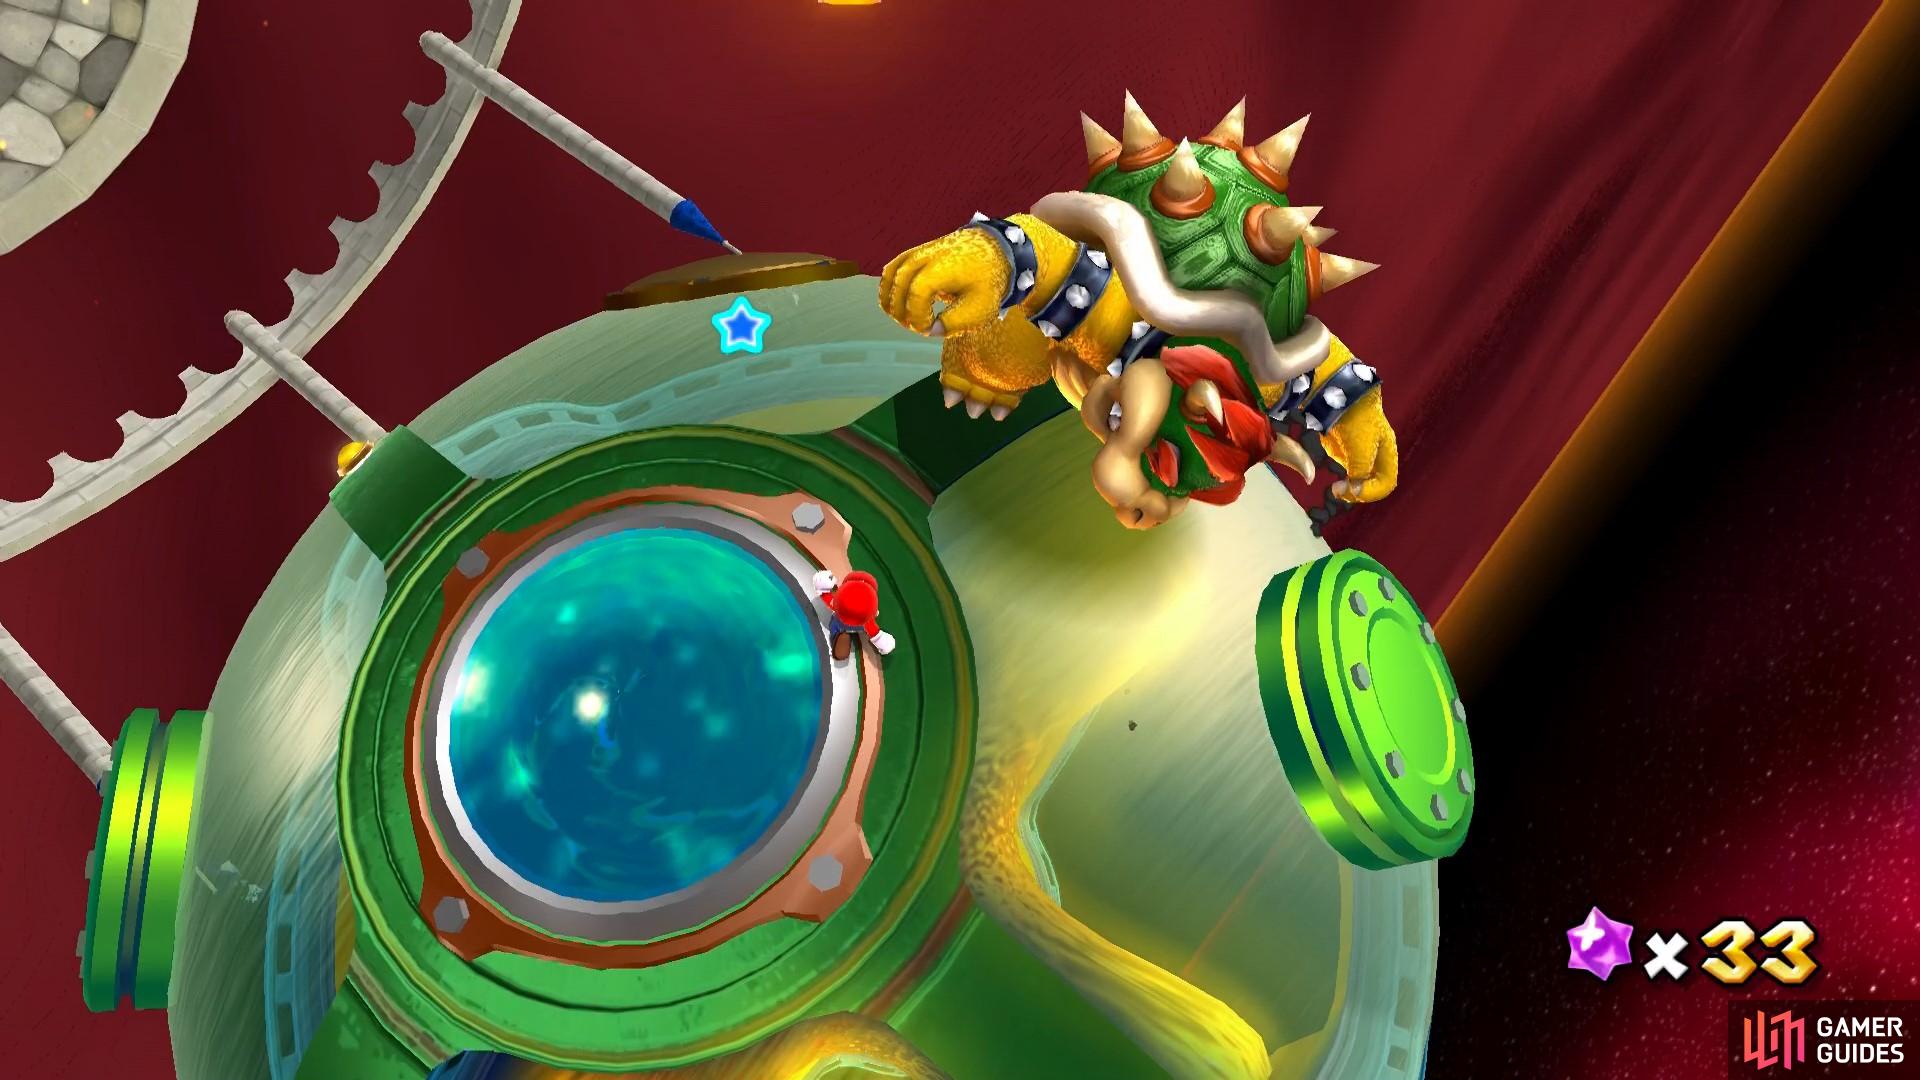 The Fiery Stronghold Bowser #39 s Star Reactor Super Mario Galaxy